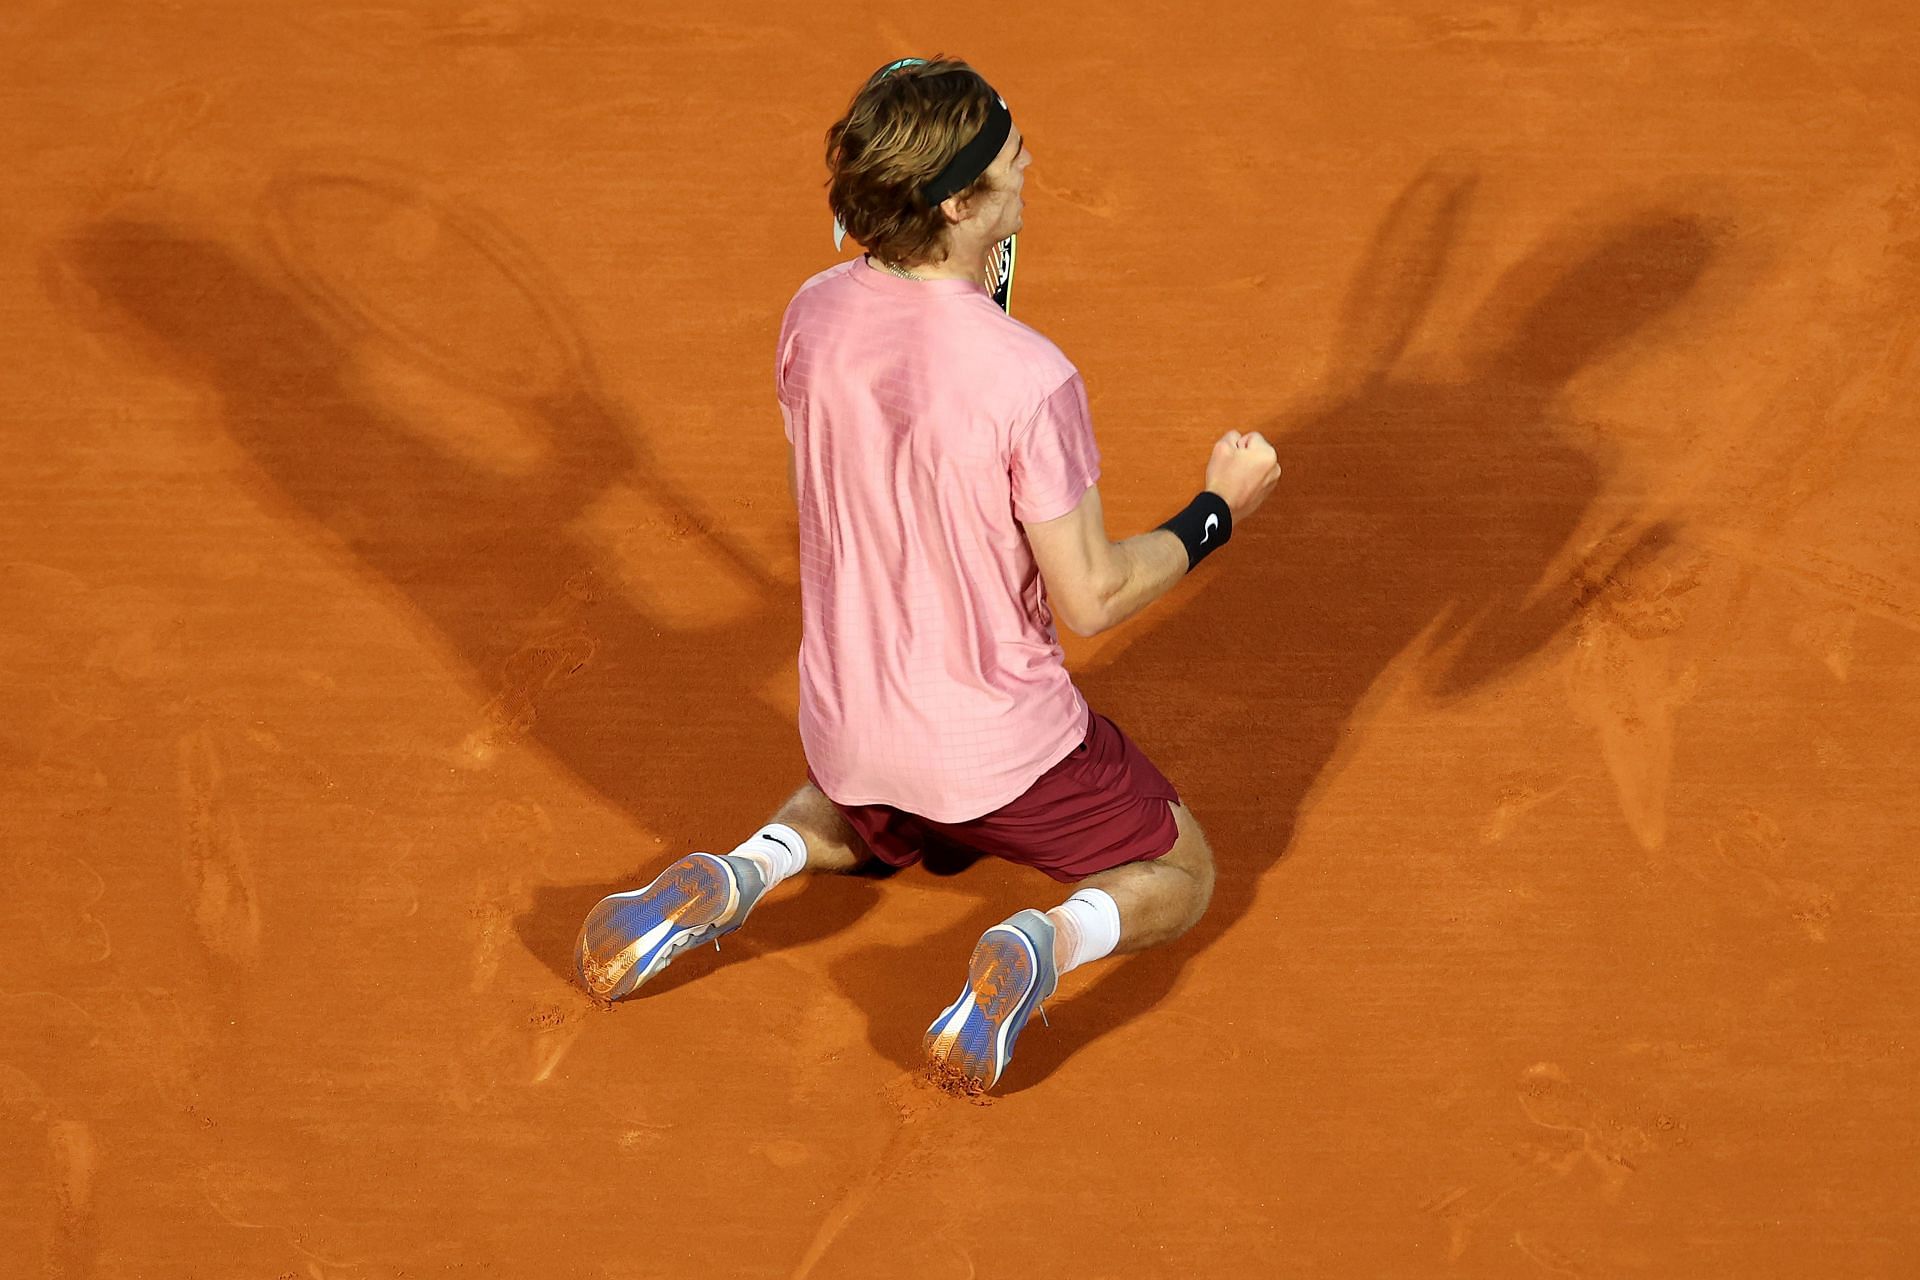 An ecstatic Andrey Rublev celebrated after beating Rafael Nadal in Monte-Carlo last year.